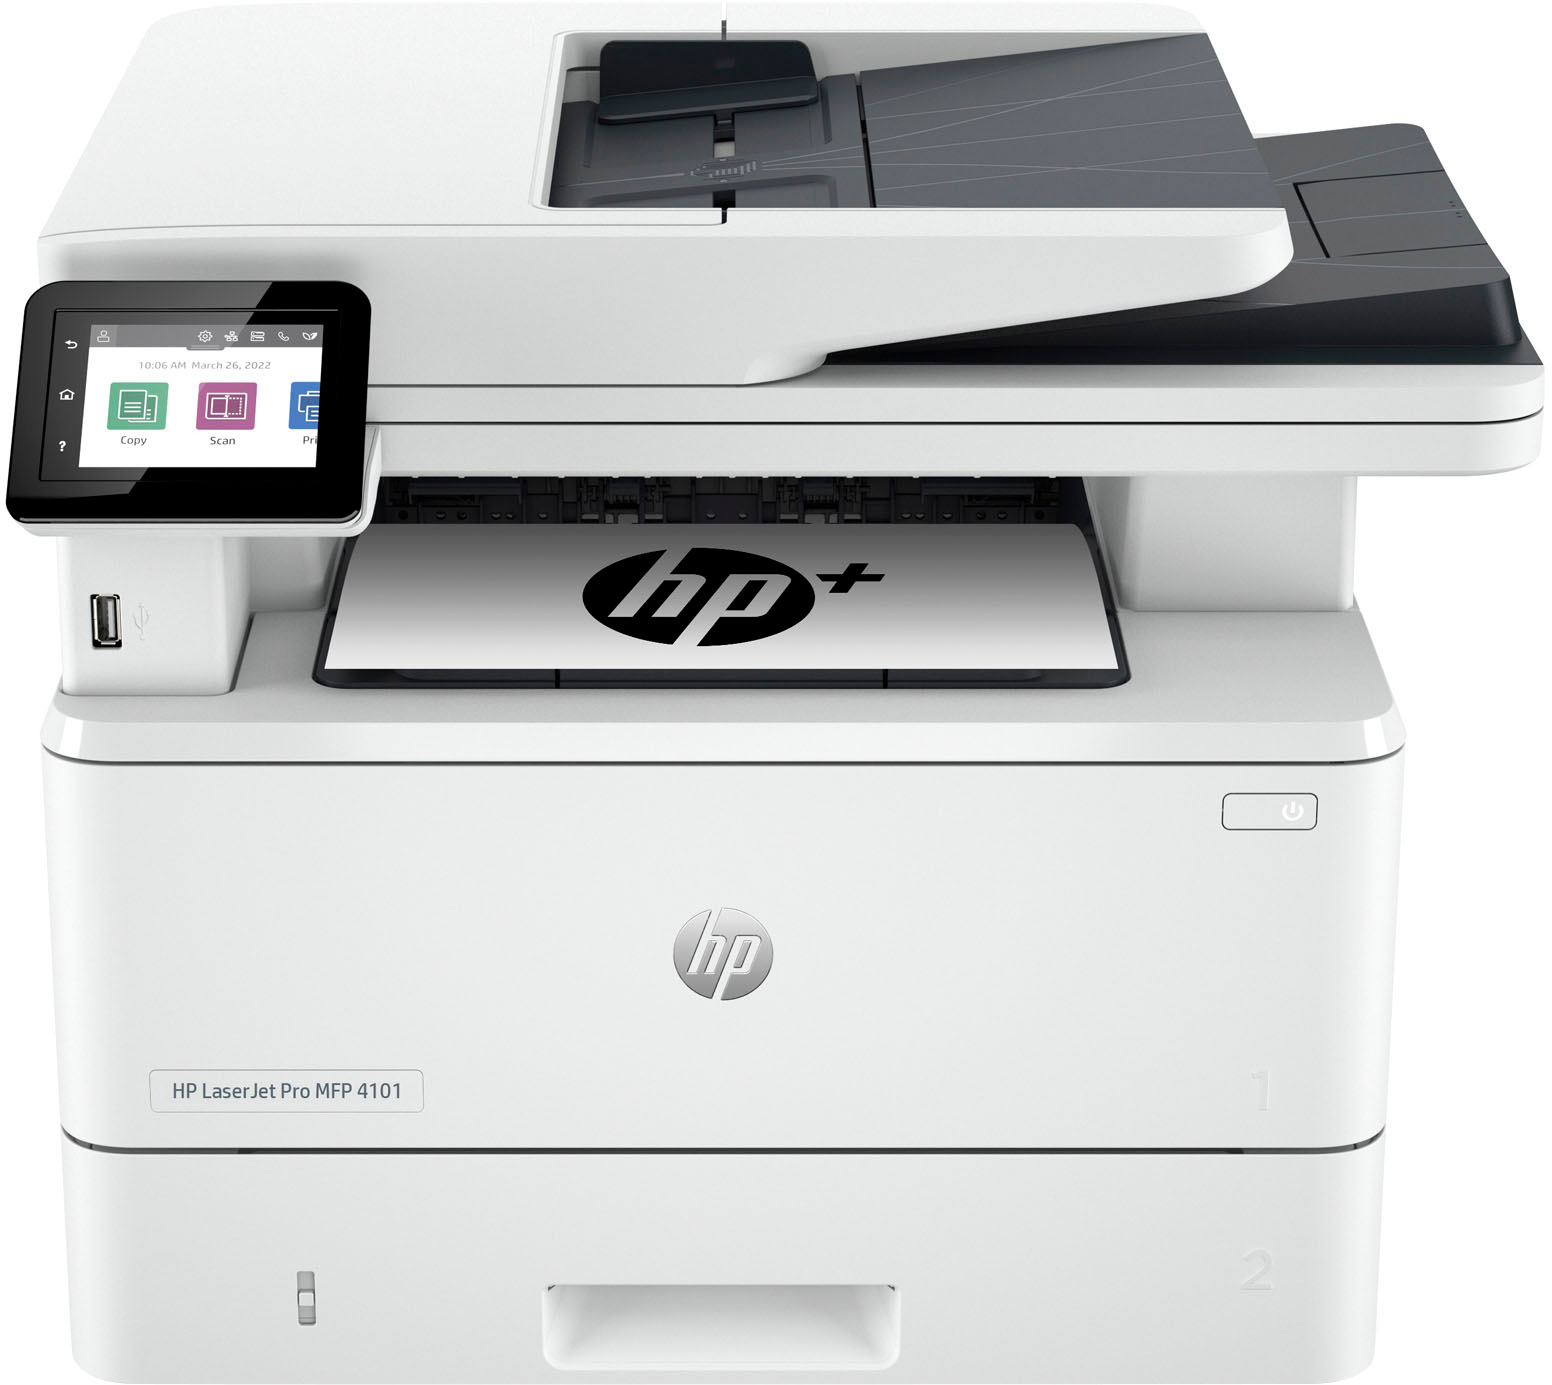 Pygmalion Brandy syndrom HP LaserJet Pro MFP 4101fdwe Wireless All-In-One Black-and-White Laser  Printer with 3 mo. of Instant Ink included with HP+ White LaserJet Pro MFP  4101fdwe - Best Buy